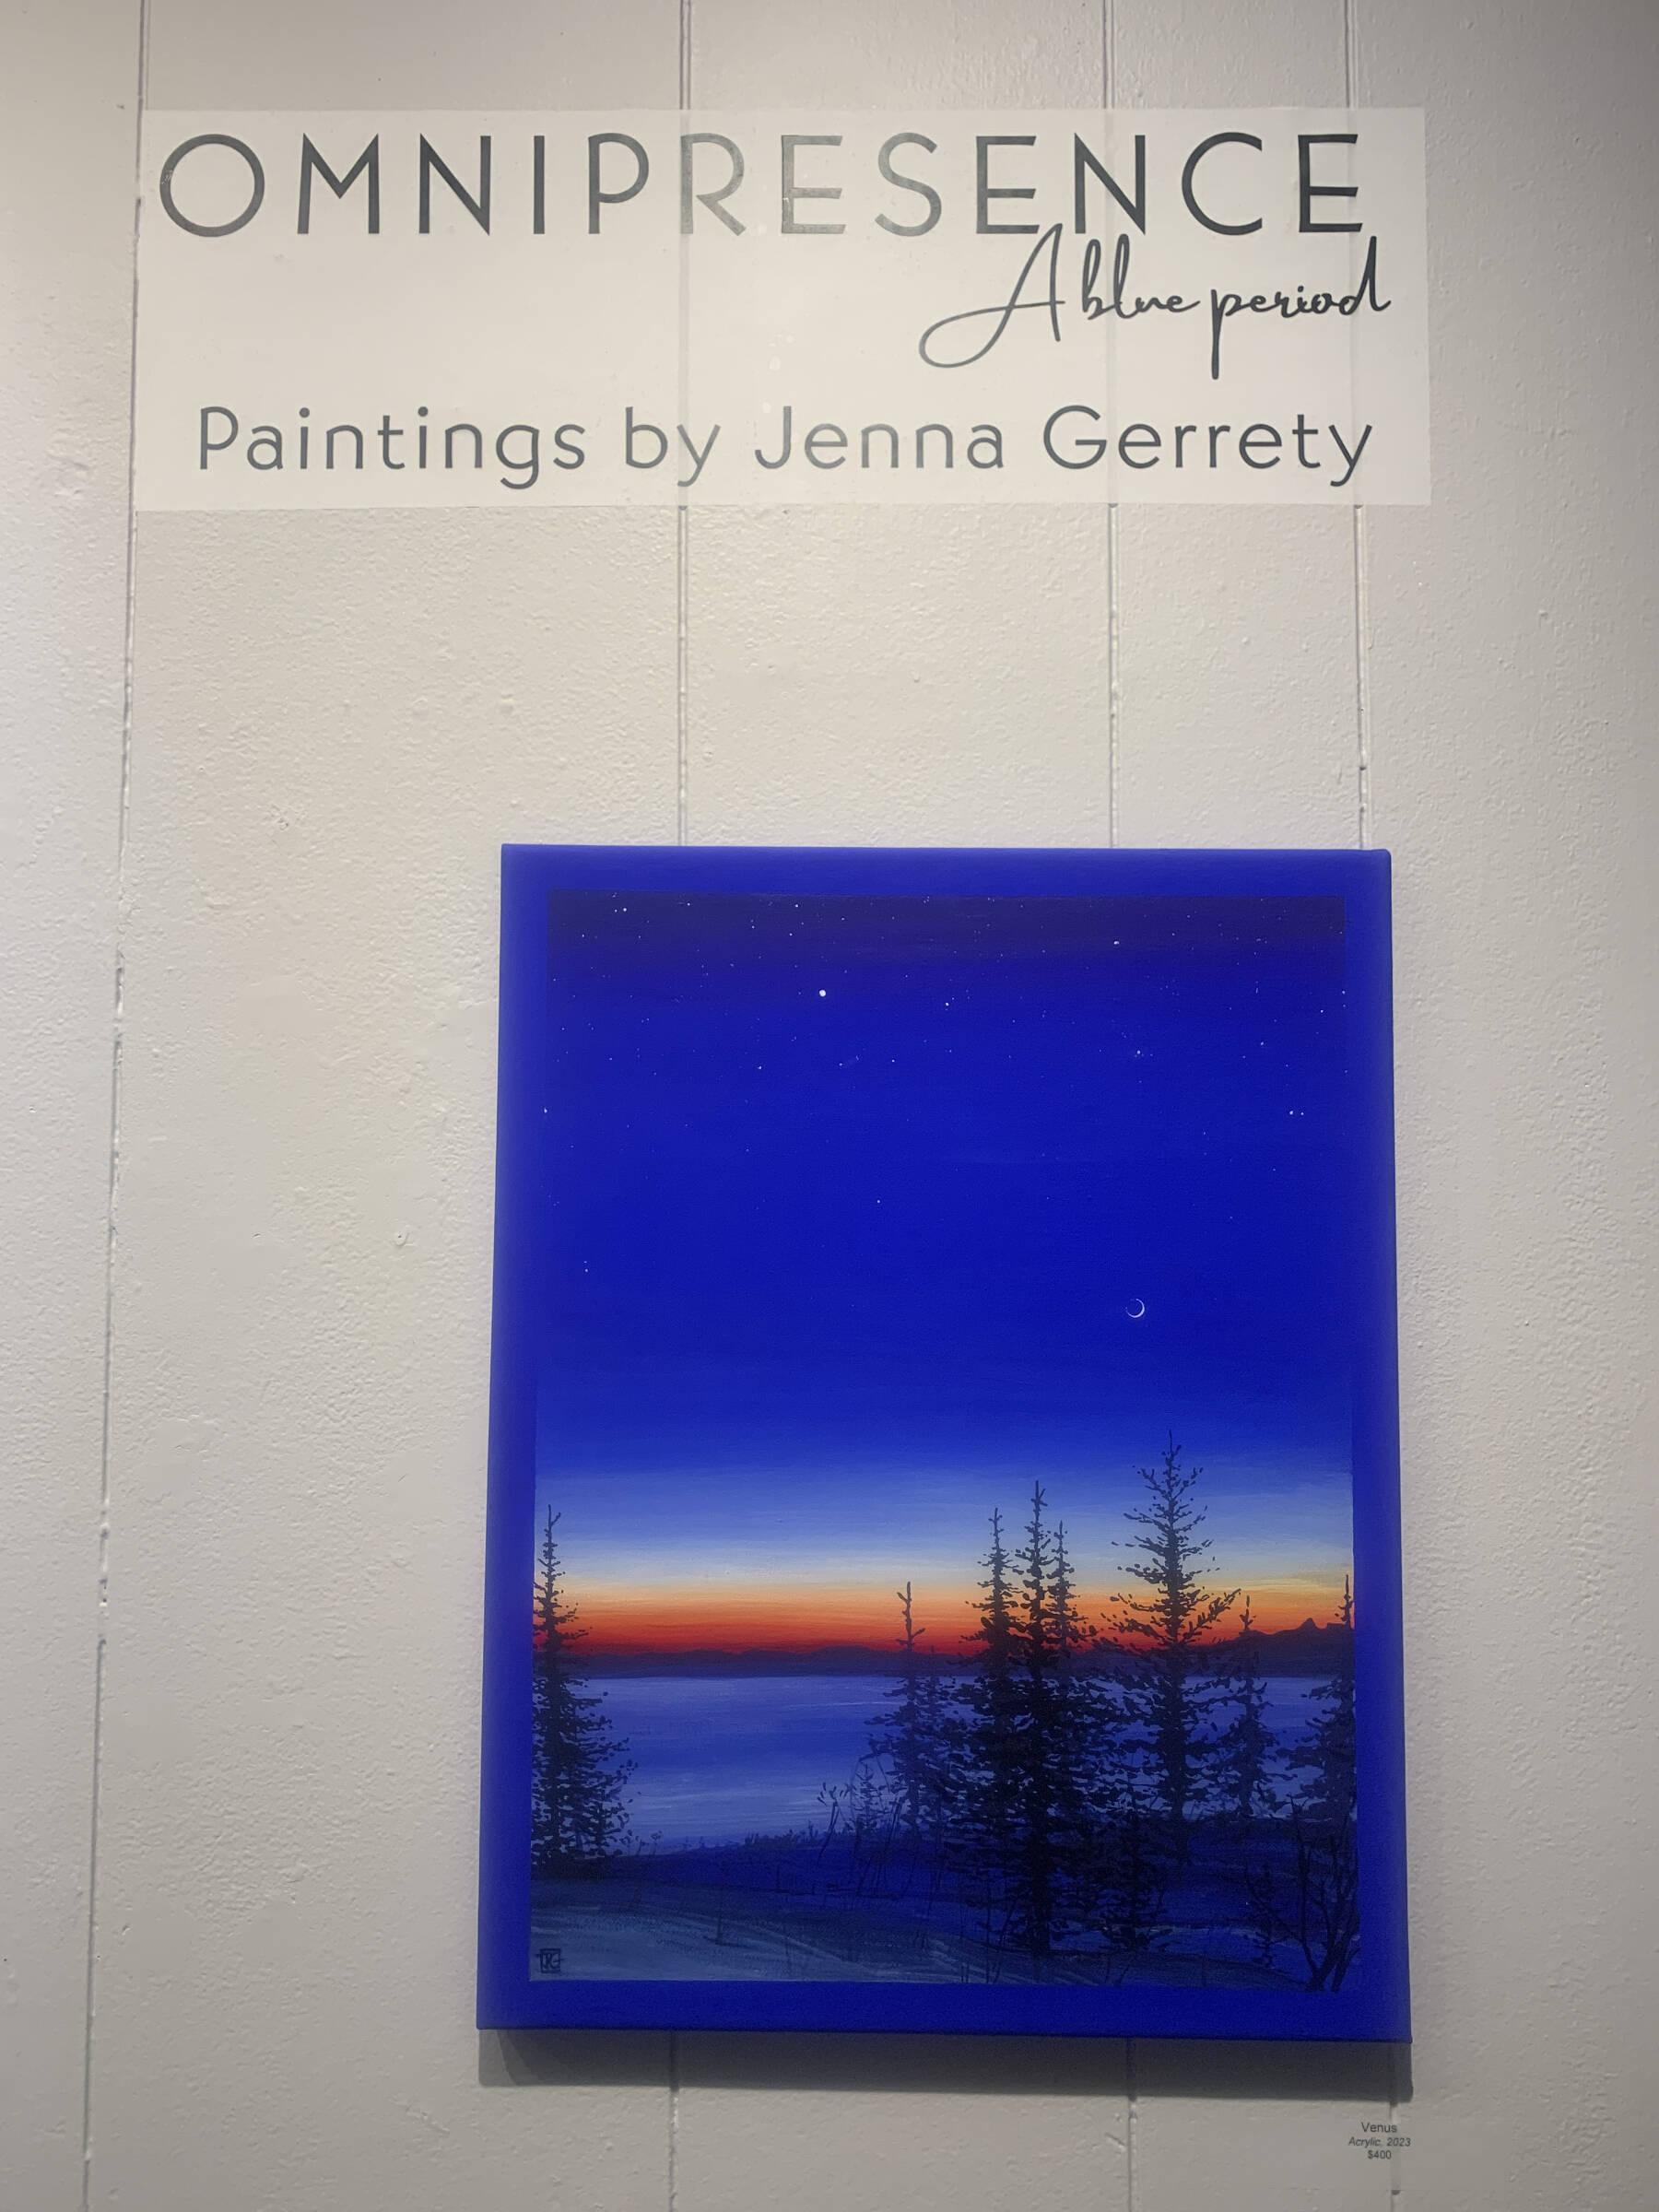 “Venus,” a painting by Jenna Gerrety in her exhibit, “Omnipresence: A Blue Period,” is on display at Homer Council on the Arts through June. Photo by Christina Whiting